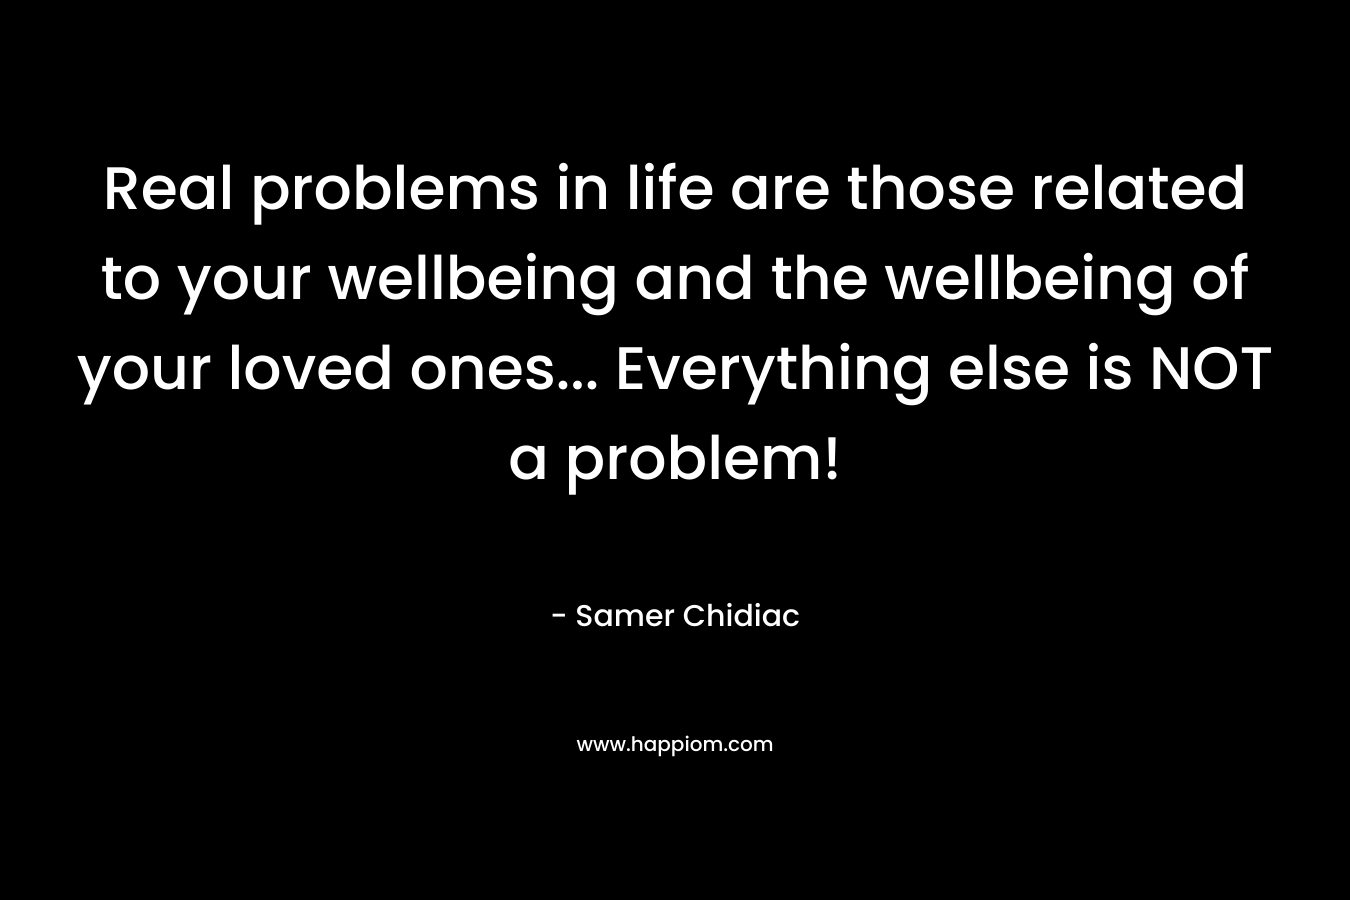 Real problems in life are those related to your wellbeing and the wellbeing of your loved ones… Everything else is NOT a problem! – Samer Chidiac